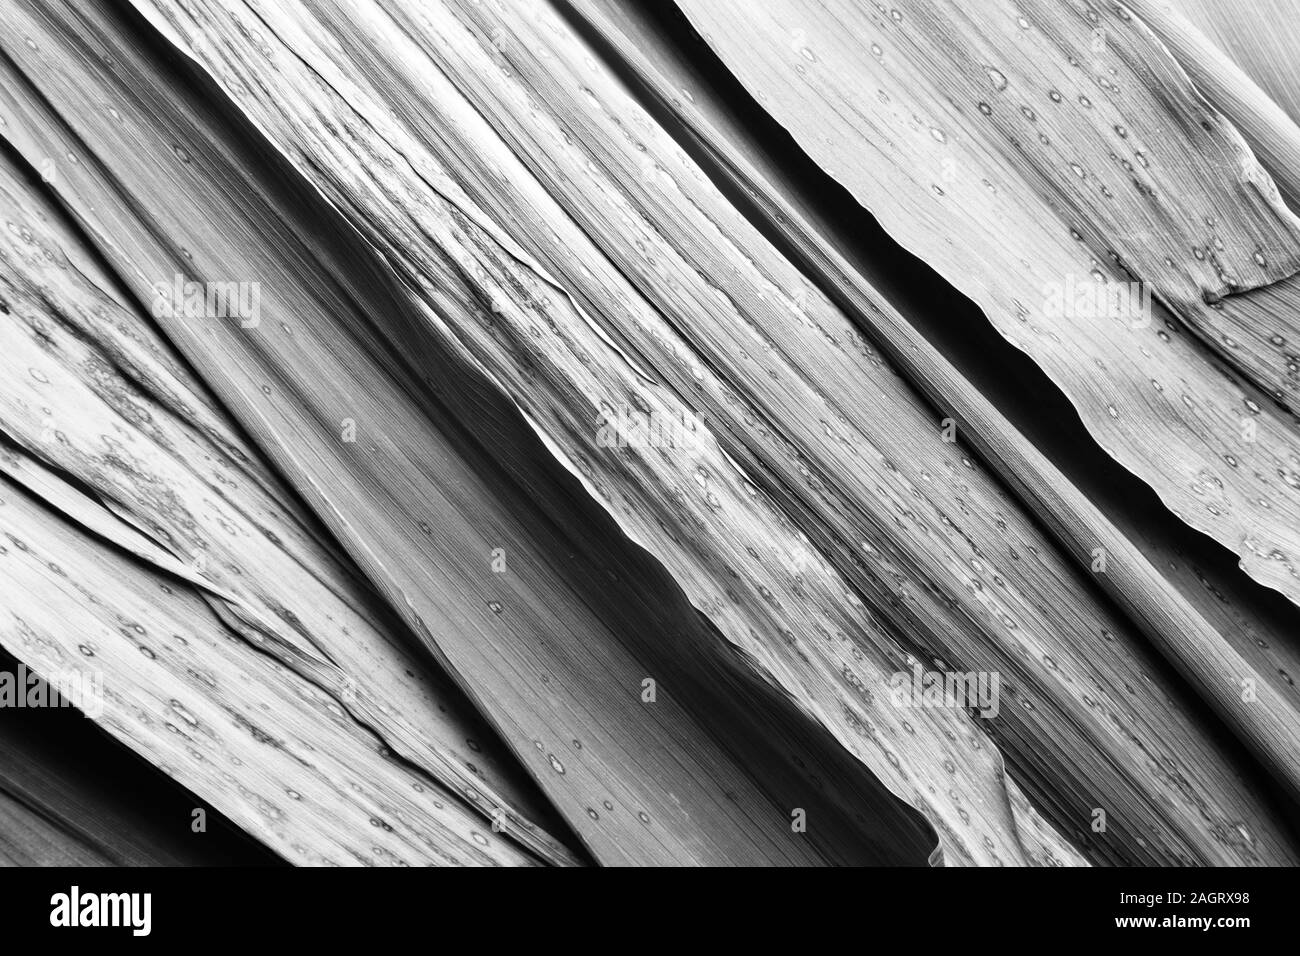 Black and white natural texture, close-up of bamboo leaves Stock Photo